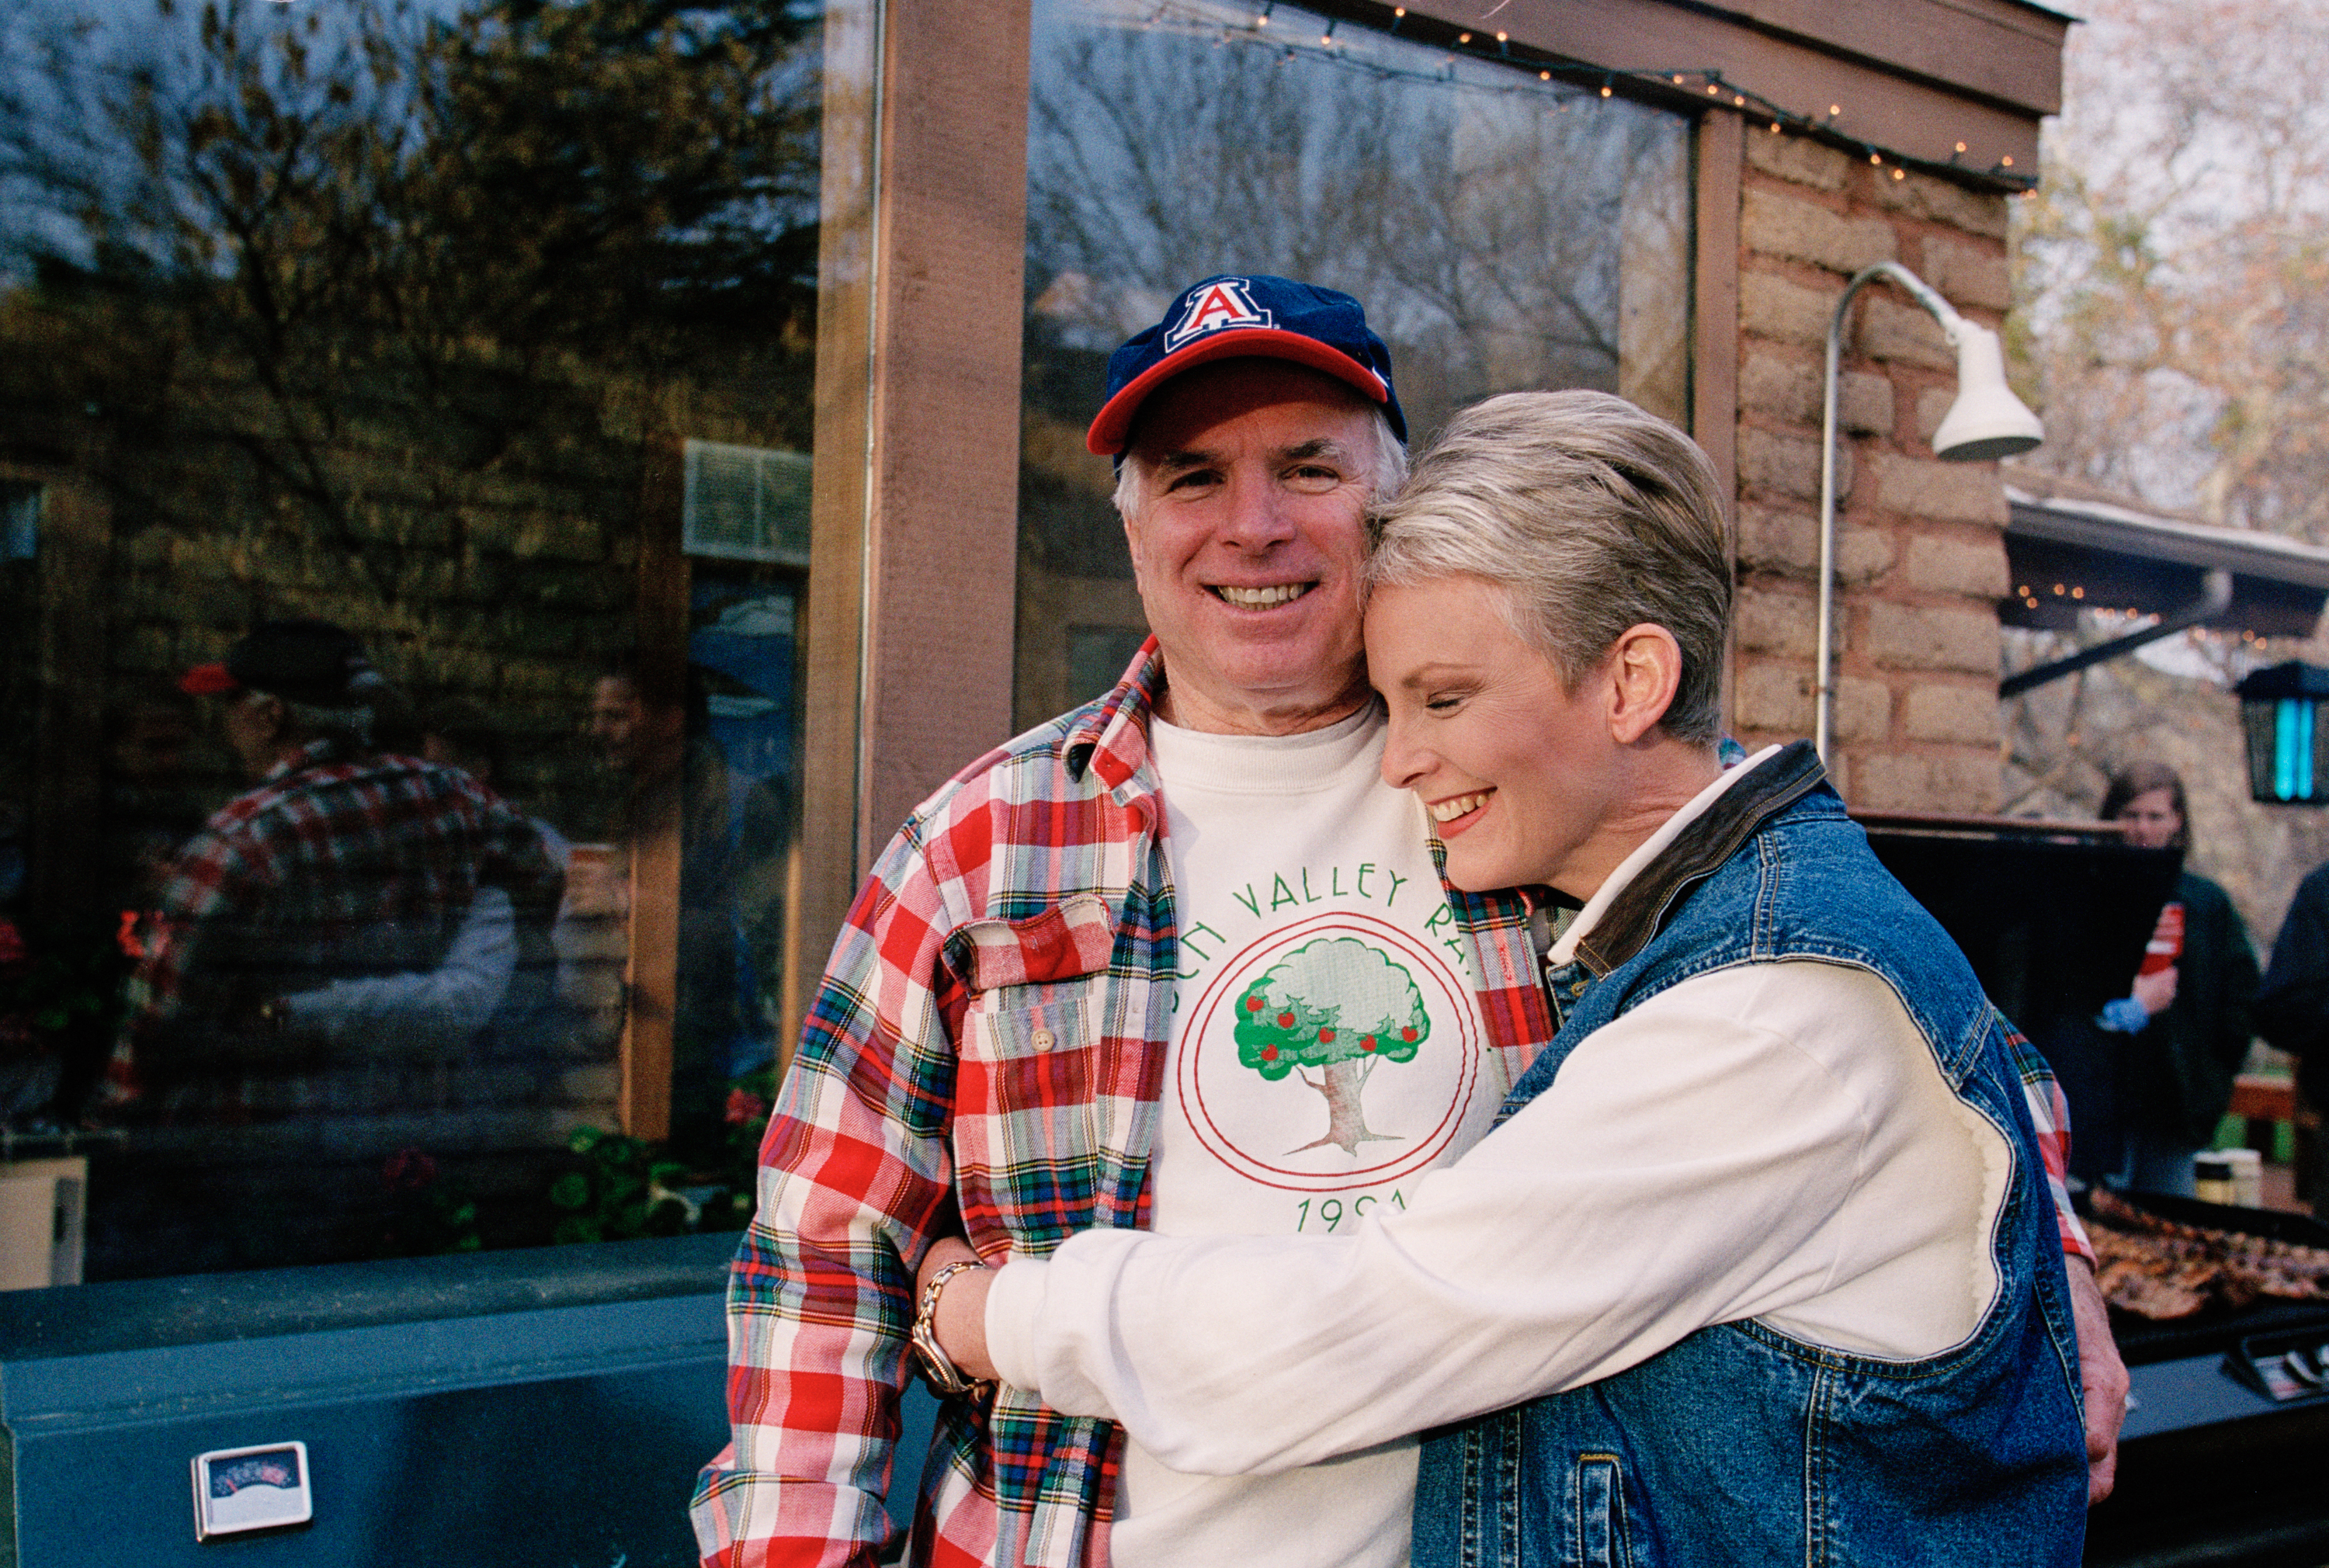 Presidential candidate John McCain (L) and his wife, Cindy McCain, smile for the camera at their family ranch, March 9, 2000 near Sedona, Arizona. (David Hume Kennerly—Getty Images)